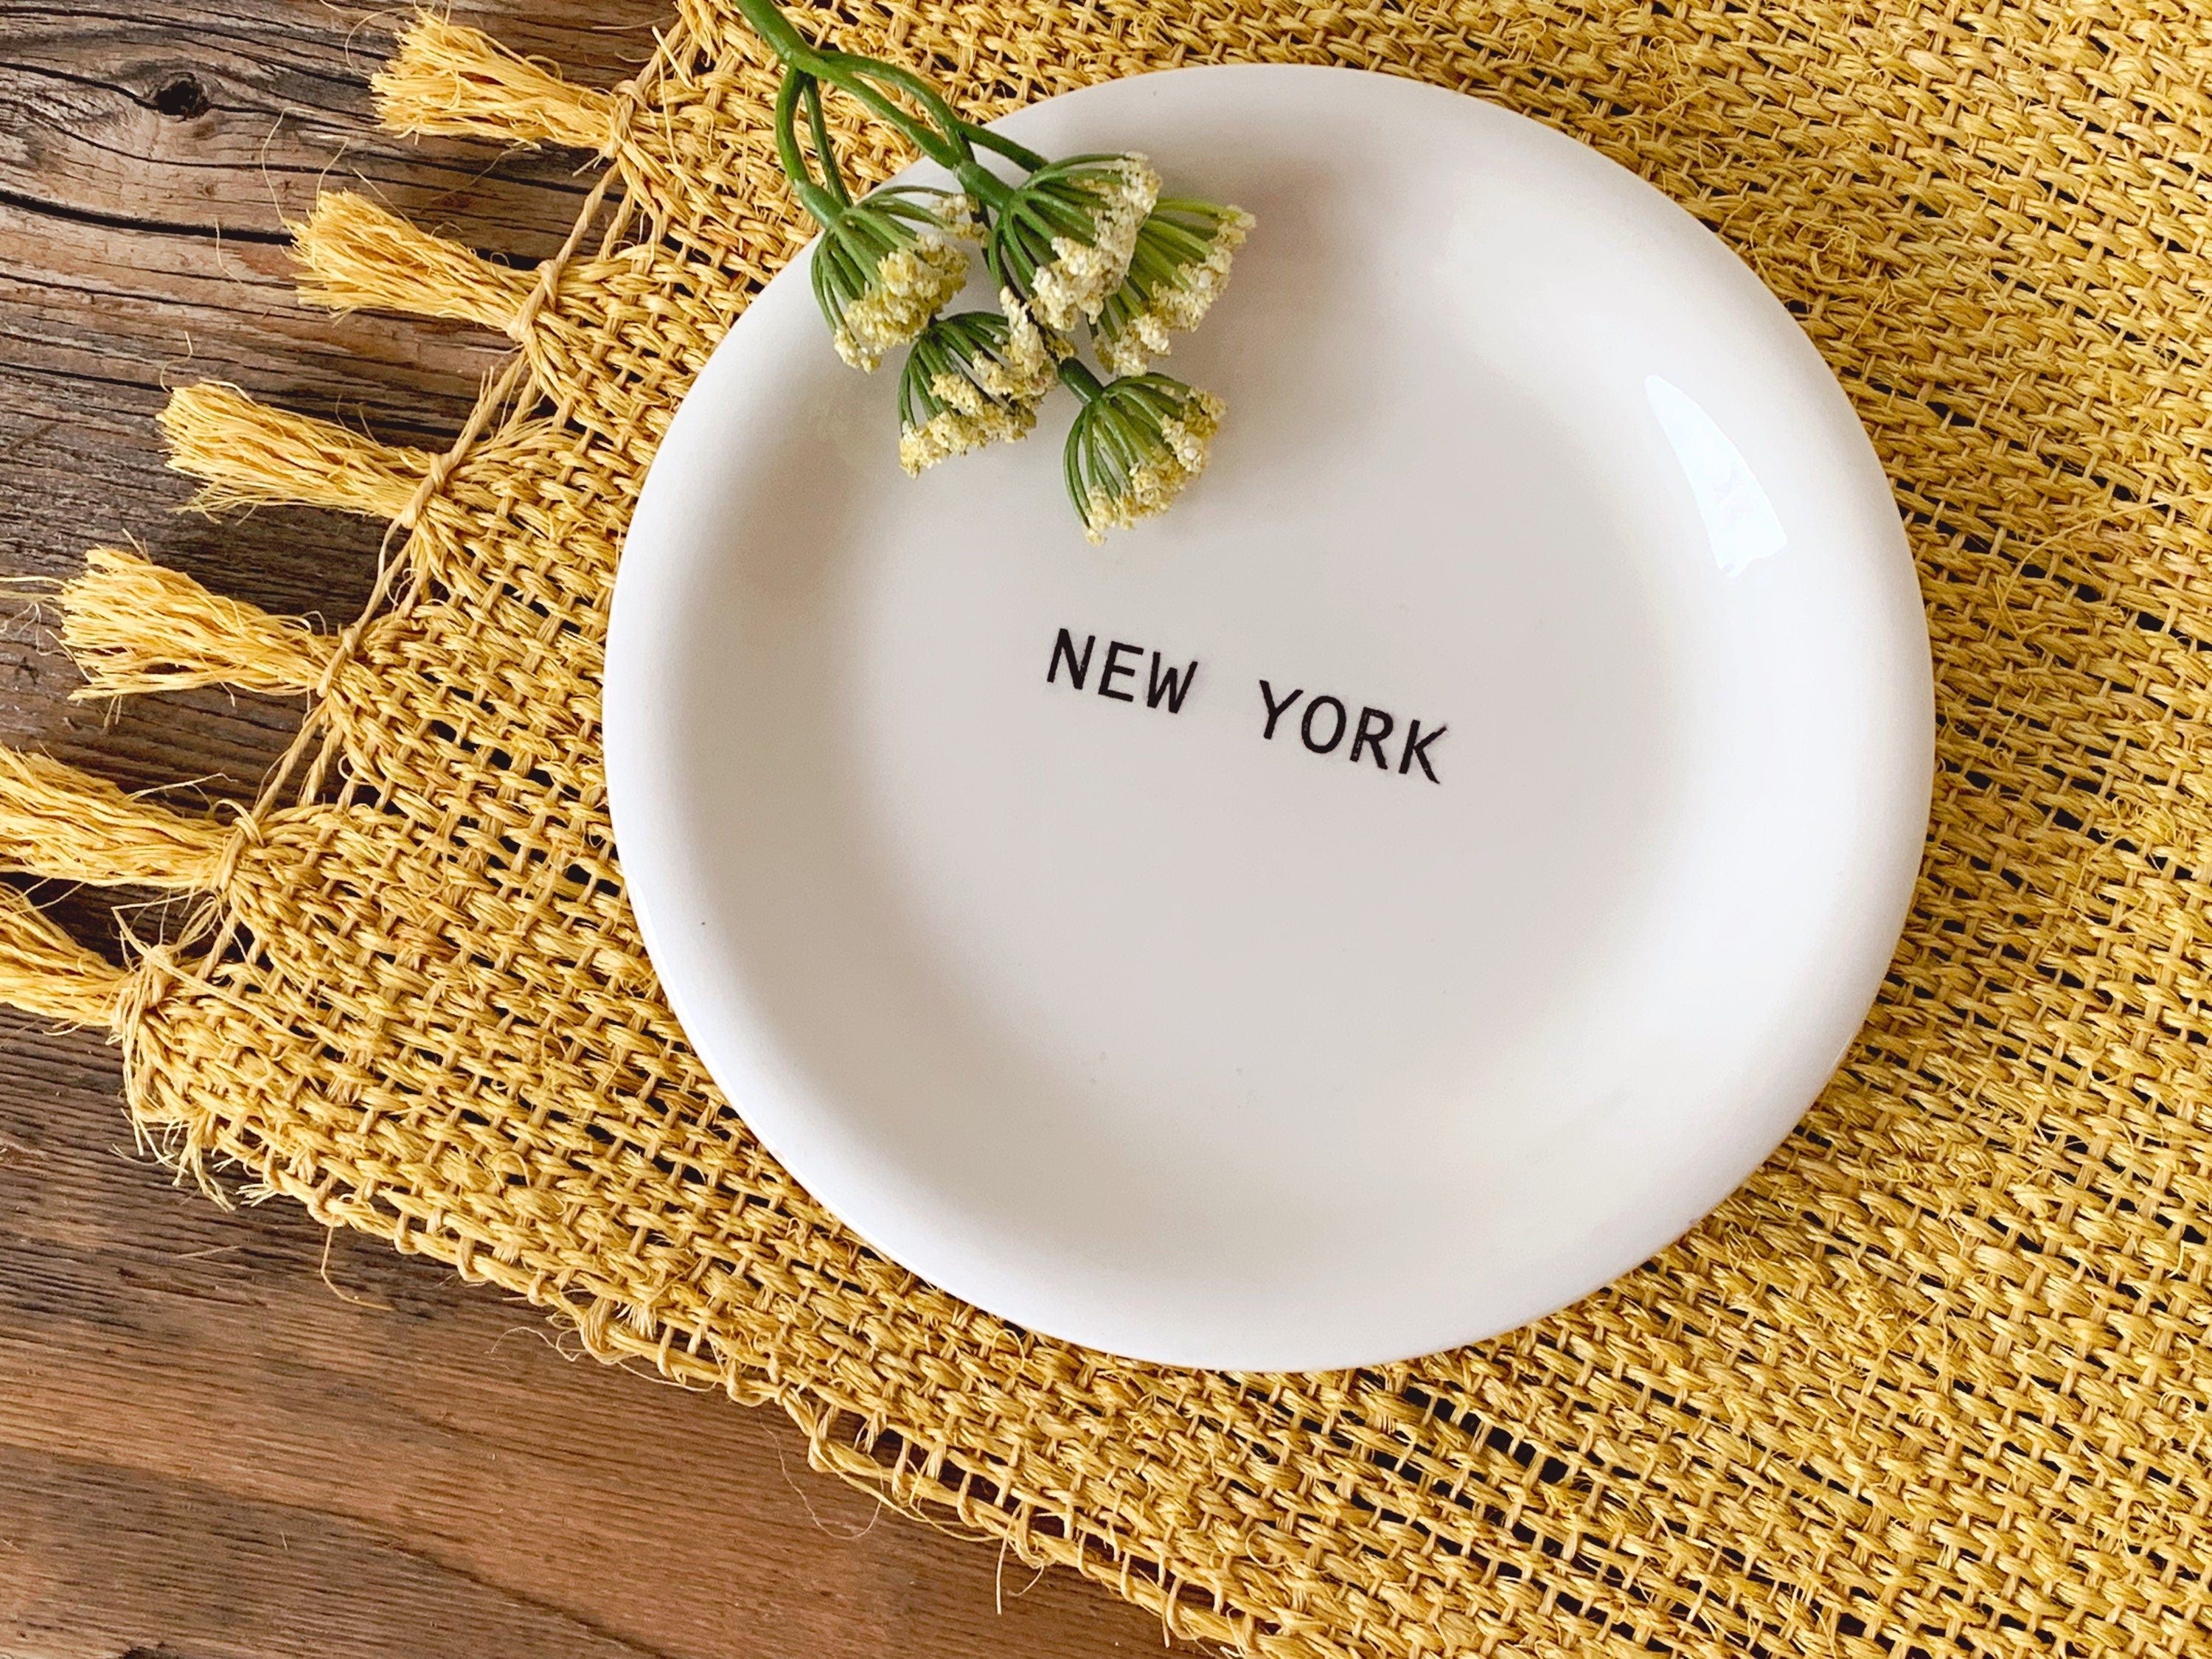 Vintage White Ceramic ]City Side Plates in New York, London, Paris, Rome, Rio | 6.5" in Dessert Plate | Afternoon Tea Bread and Butter Plate